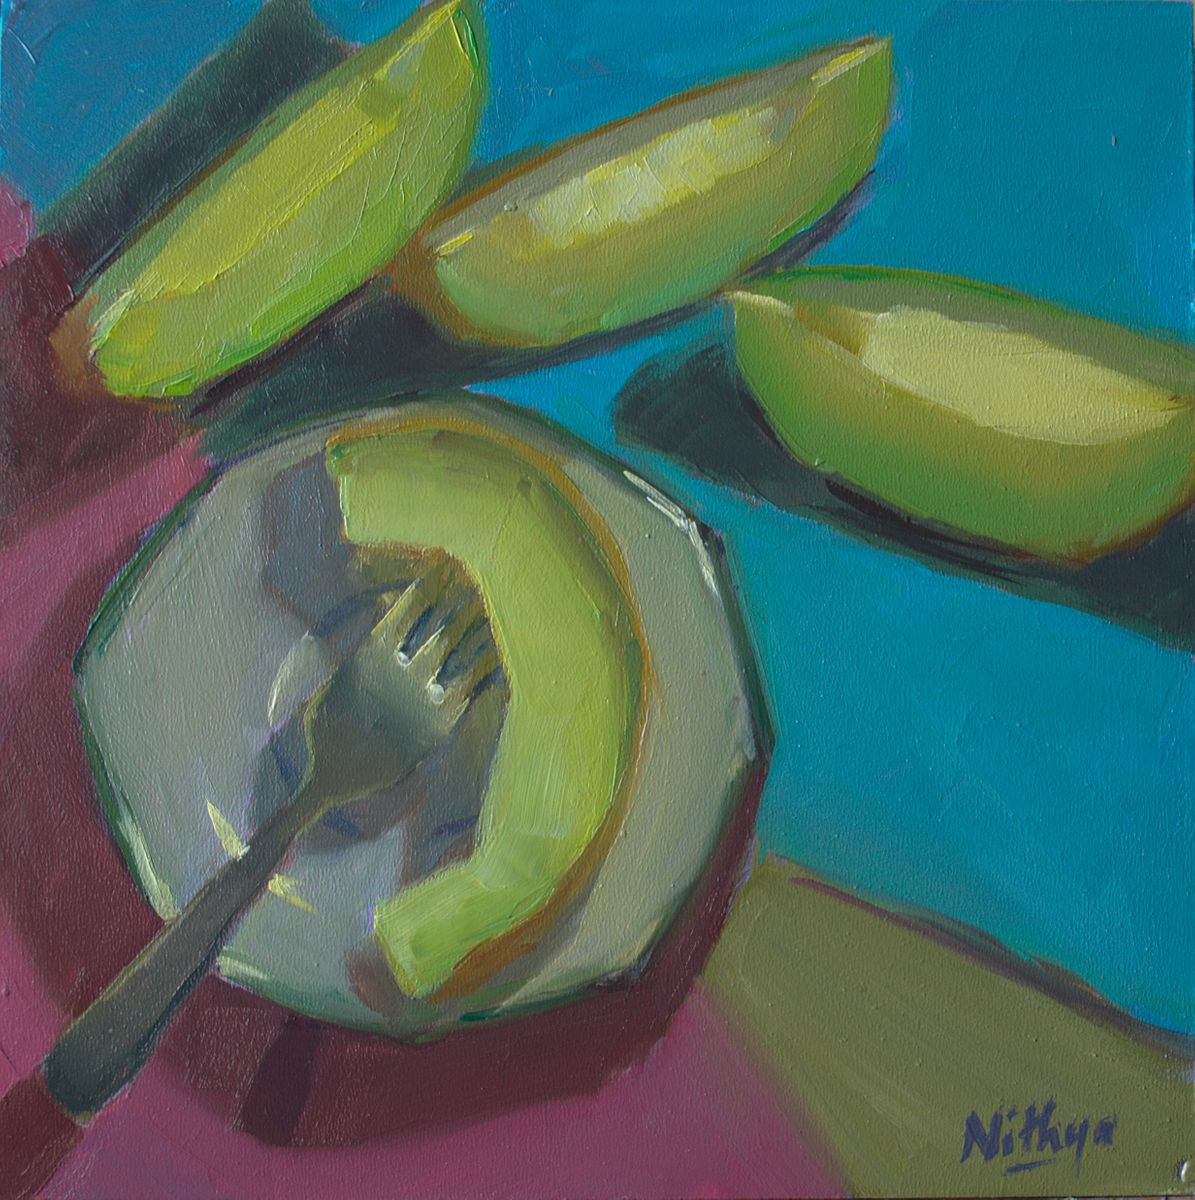 Original Kitchen Still Life - Melon party IV, One of a kind artwork, Home decor by Nithya Swaminathan